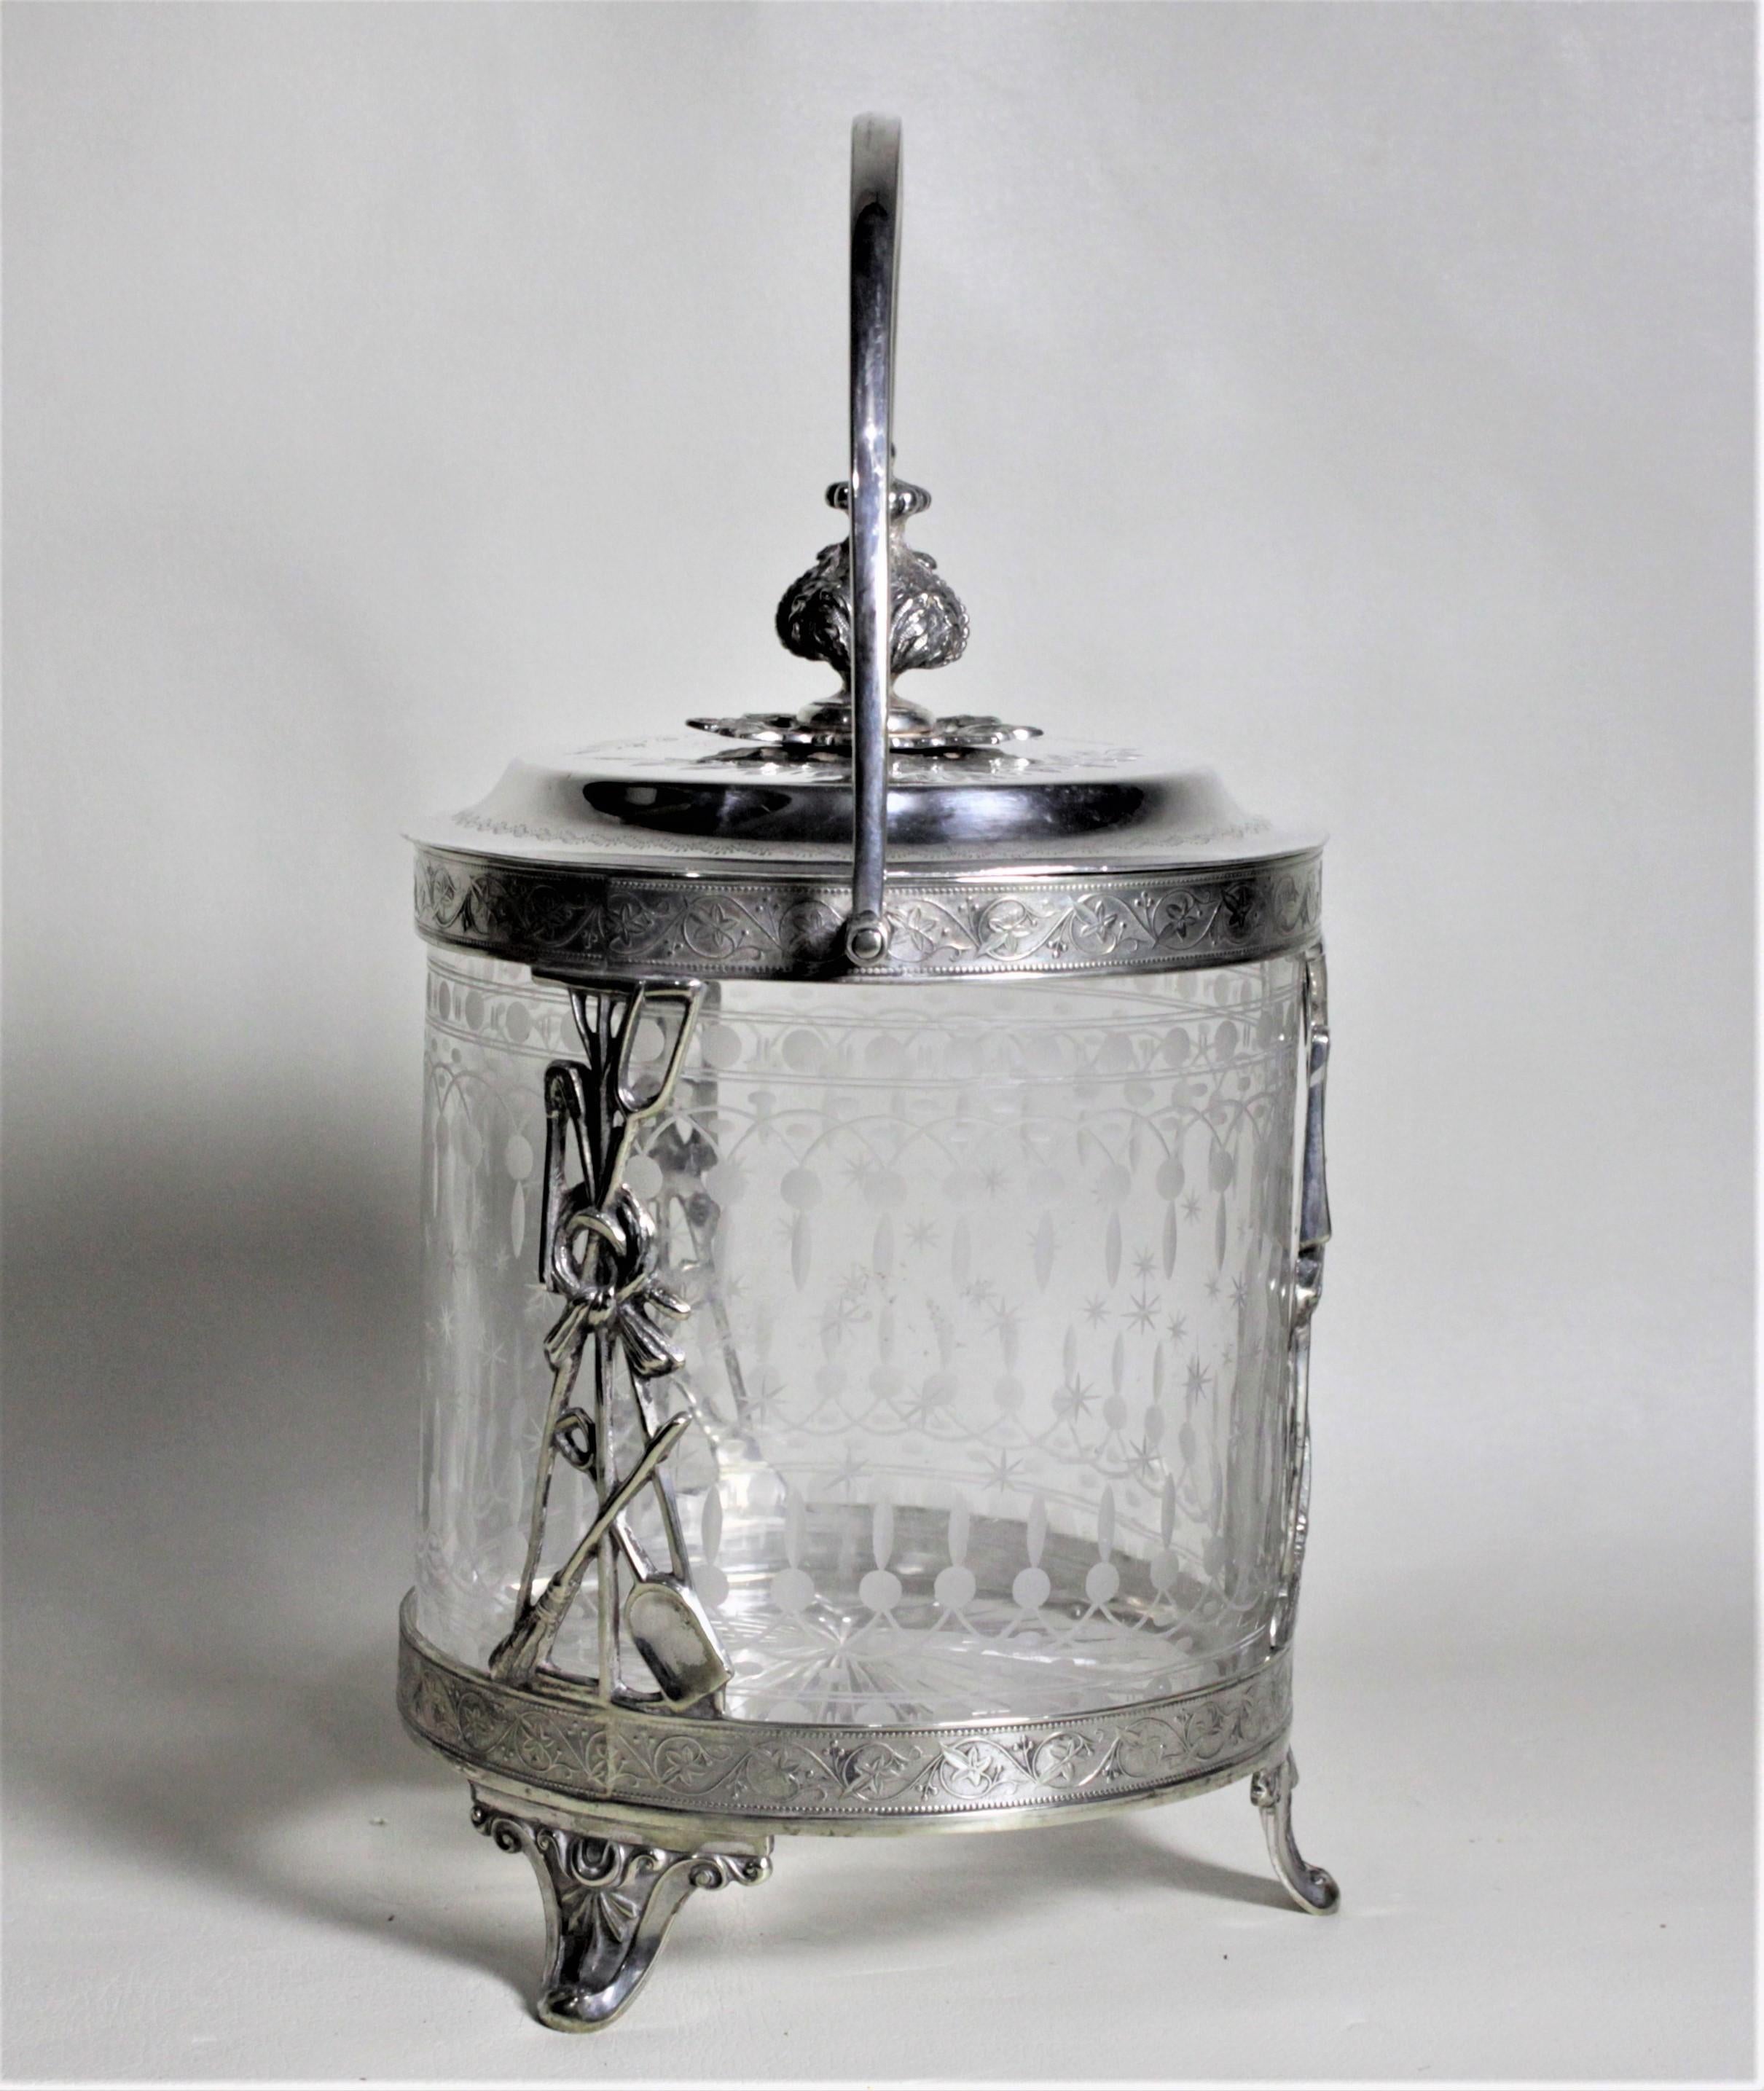 Edwardian Antique Silver Plated Biscuit Barrel with Figural Decor & Etched Glass Insert